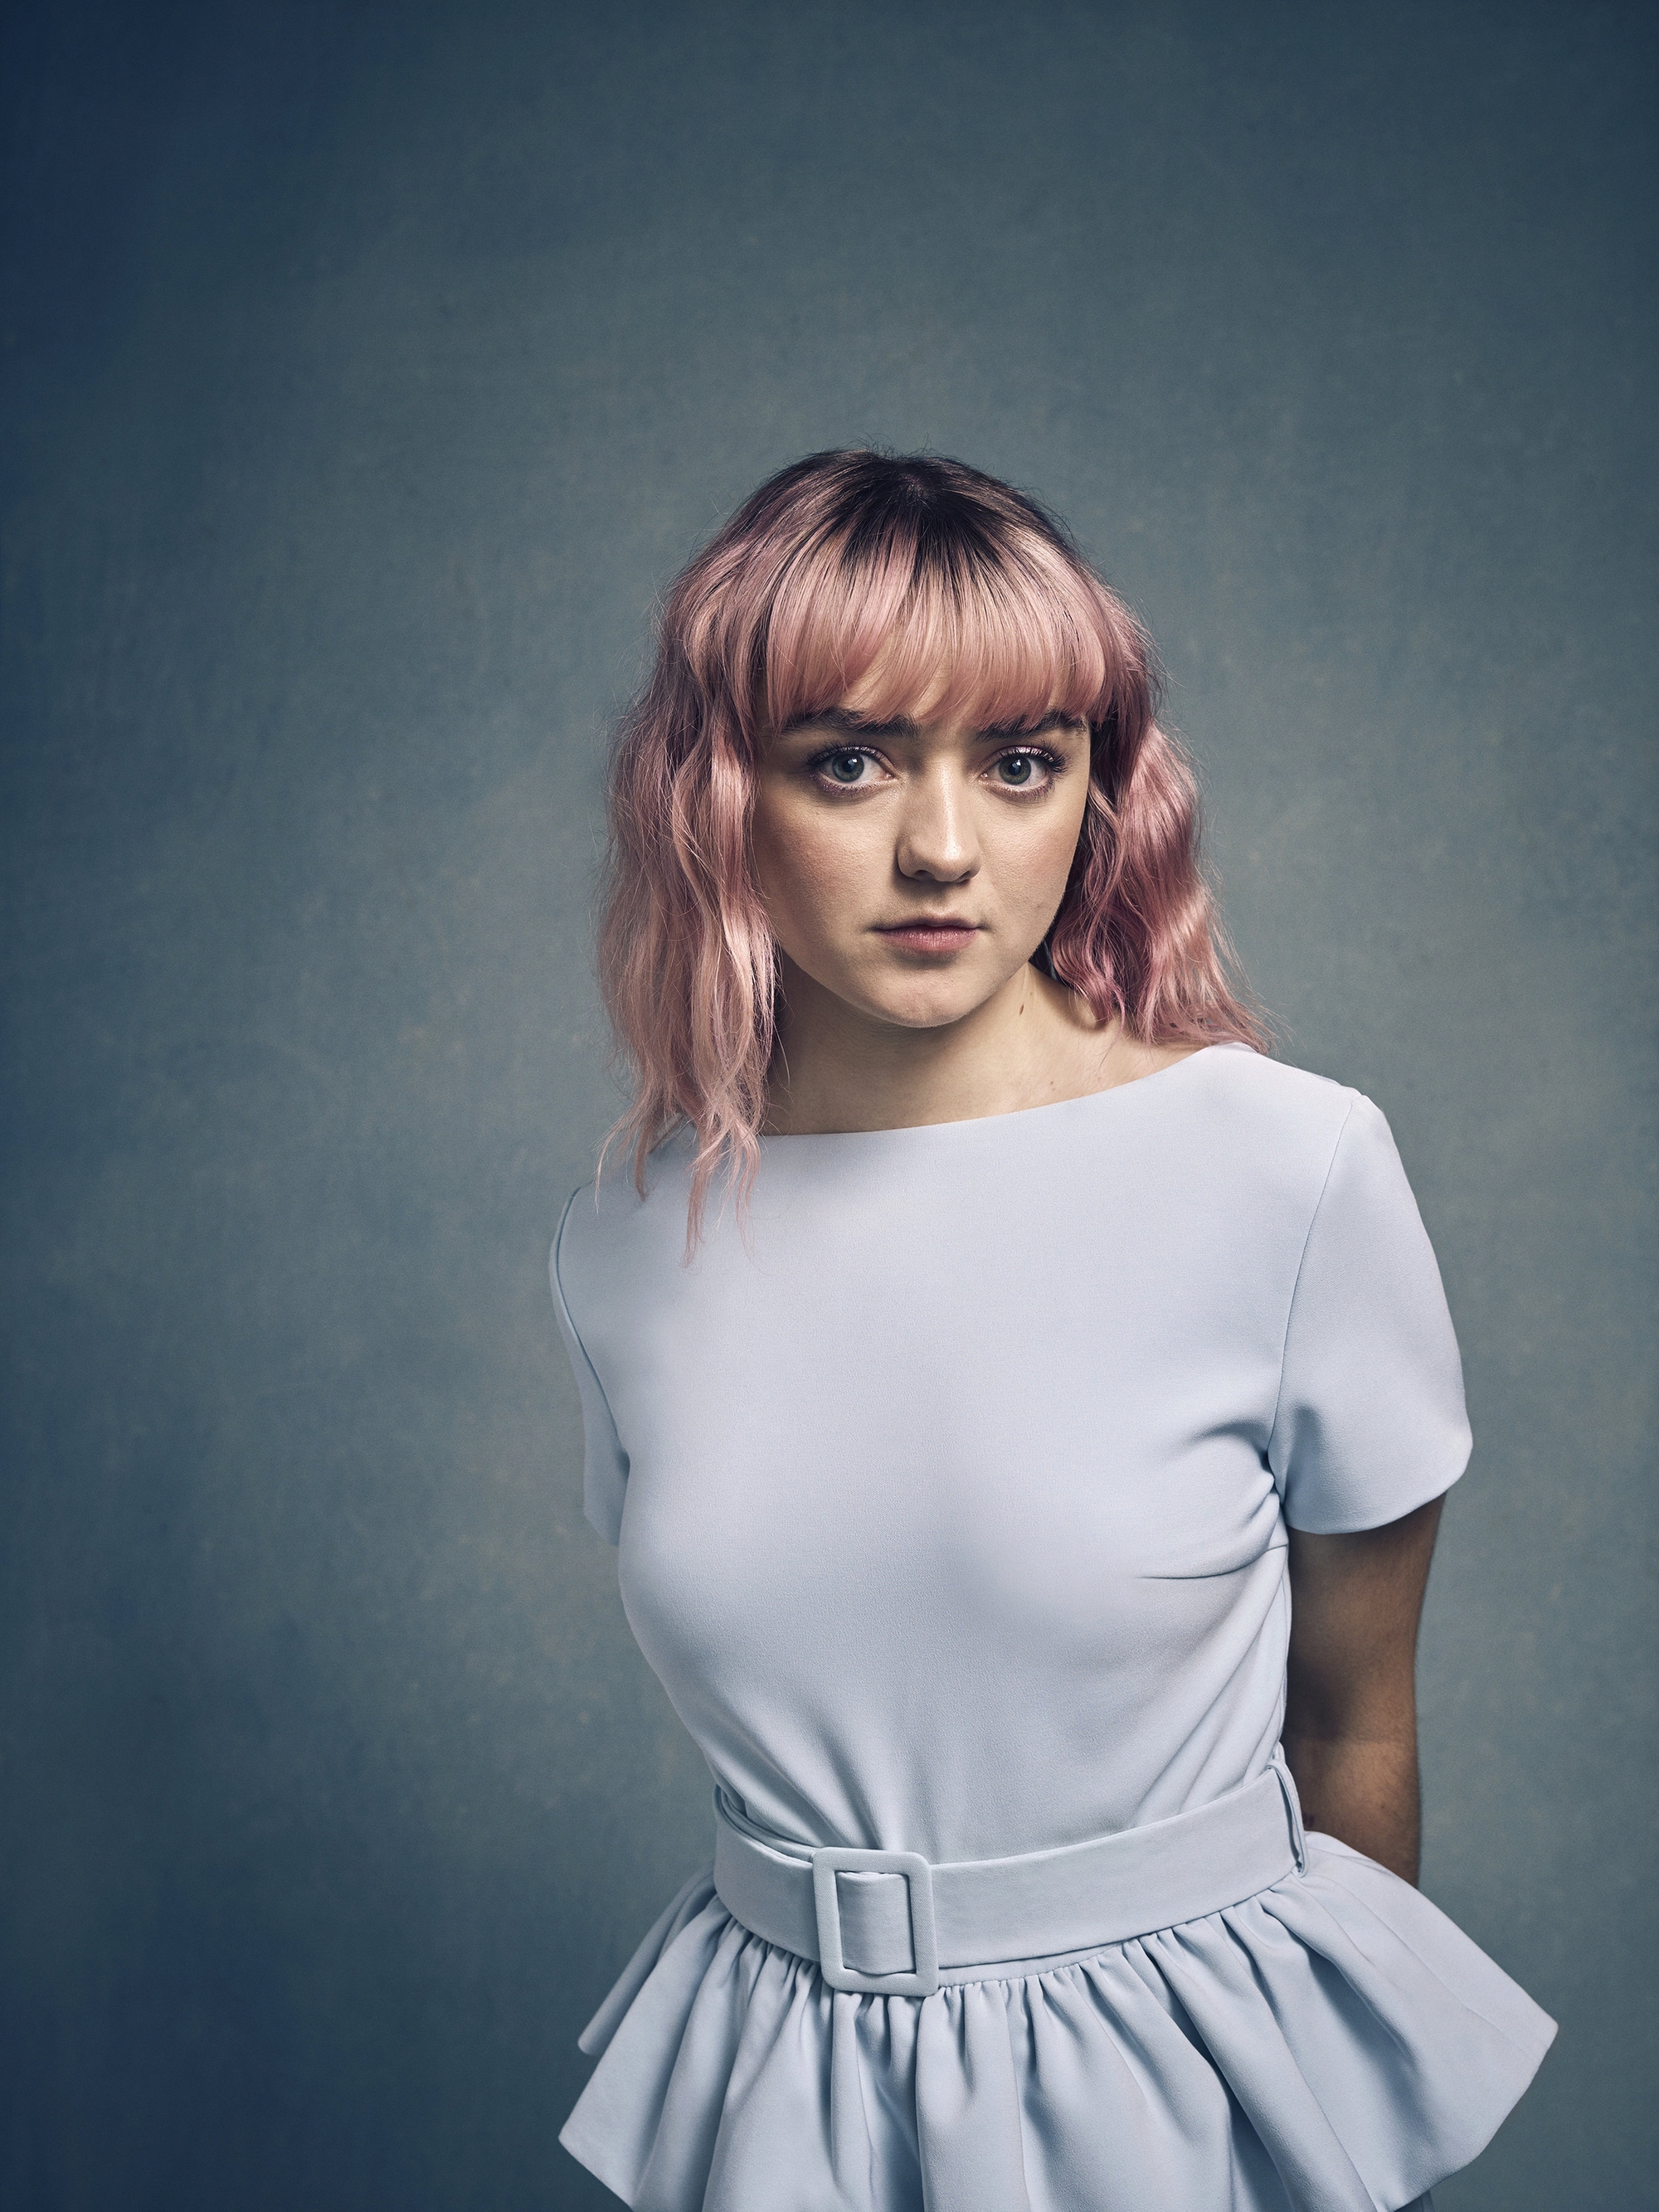 People 2000x2667 Maisie Williams actress women pink hair portrait simple background